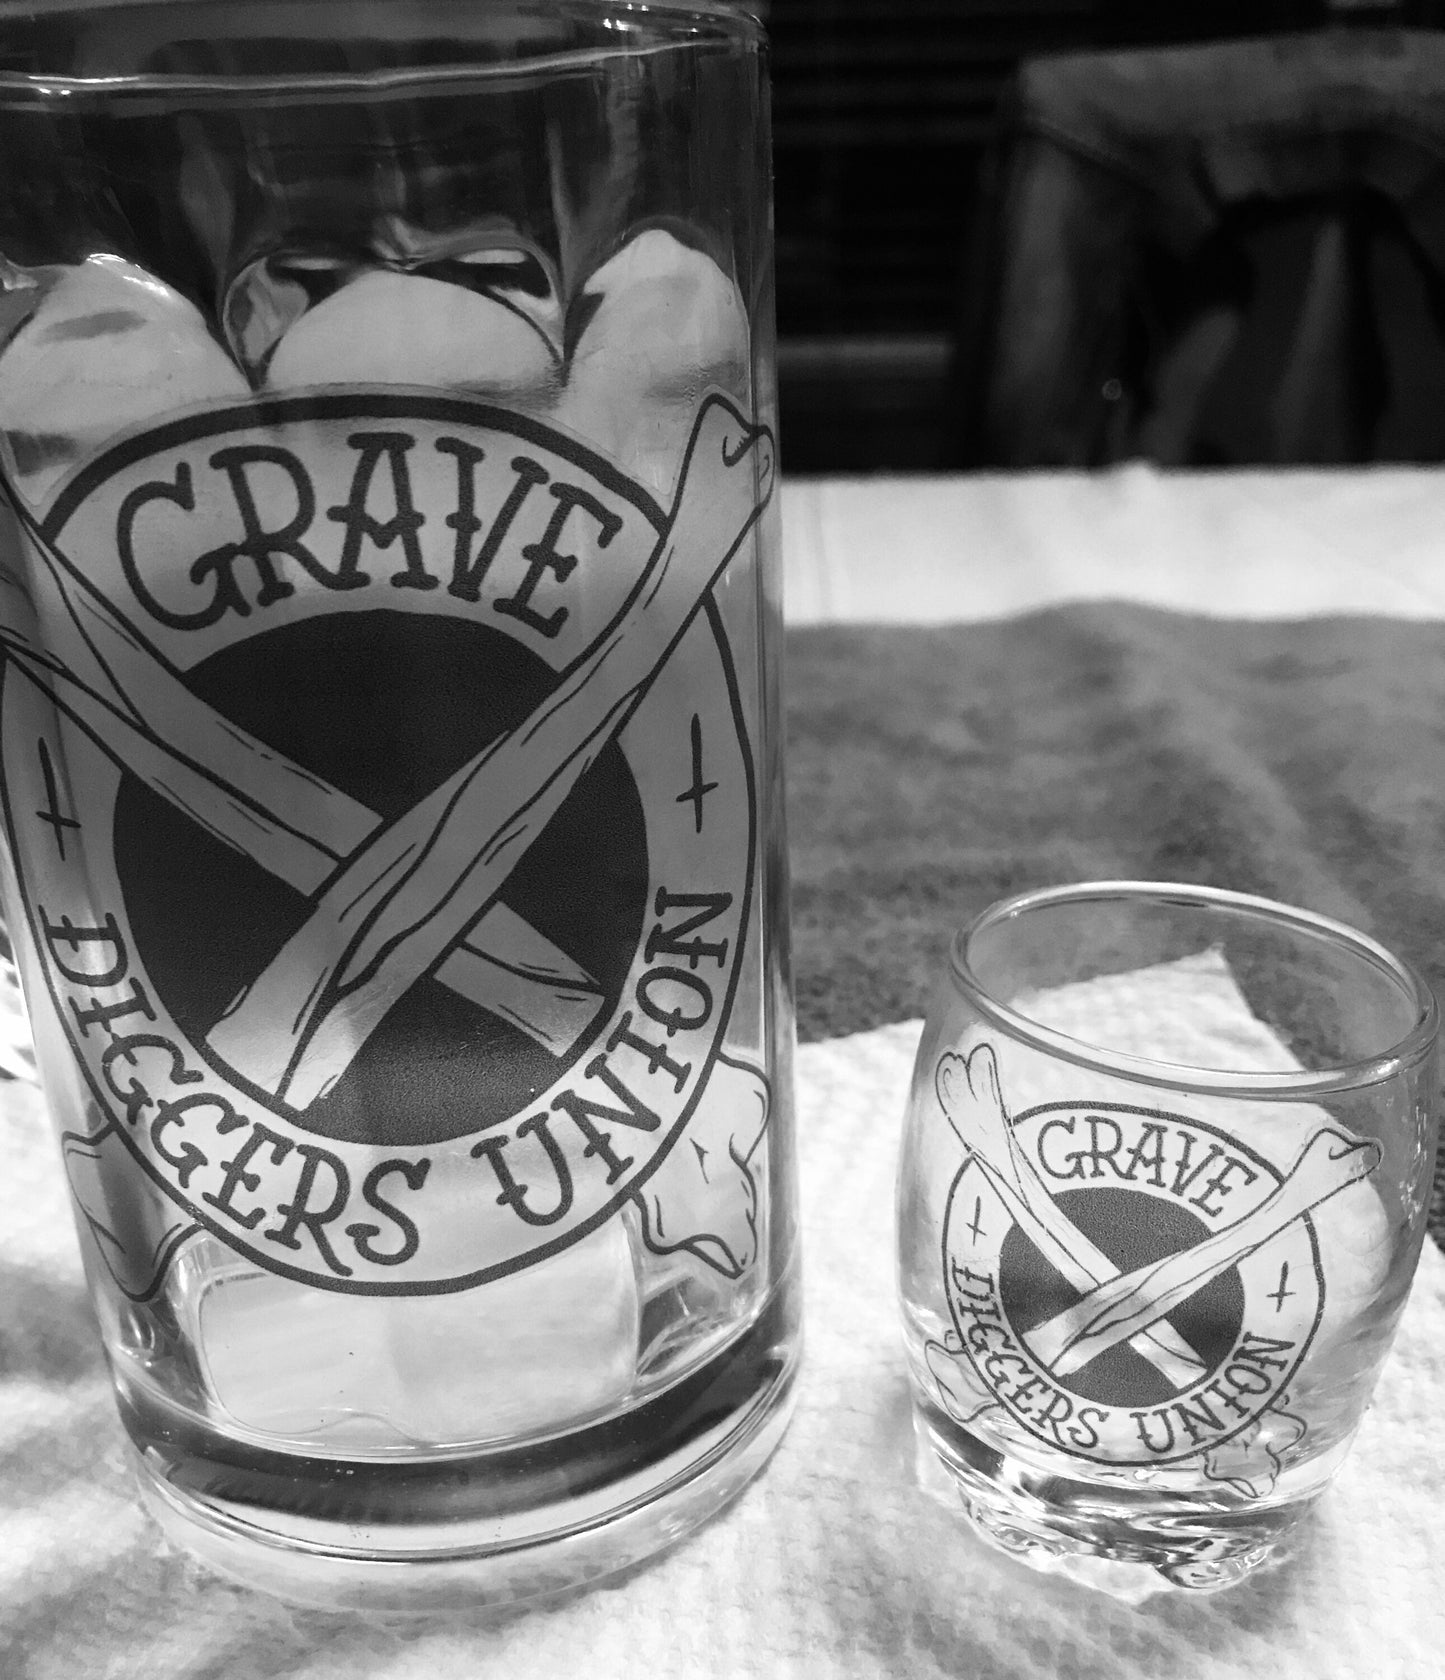 Grave Diggers Union Beer Stein.